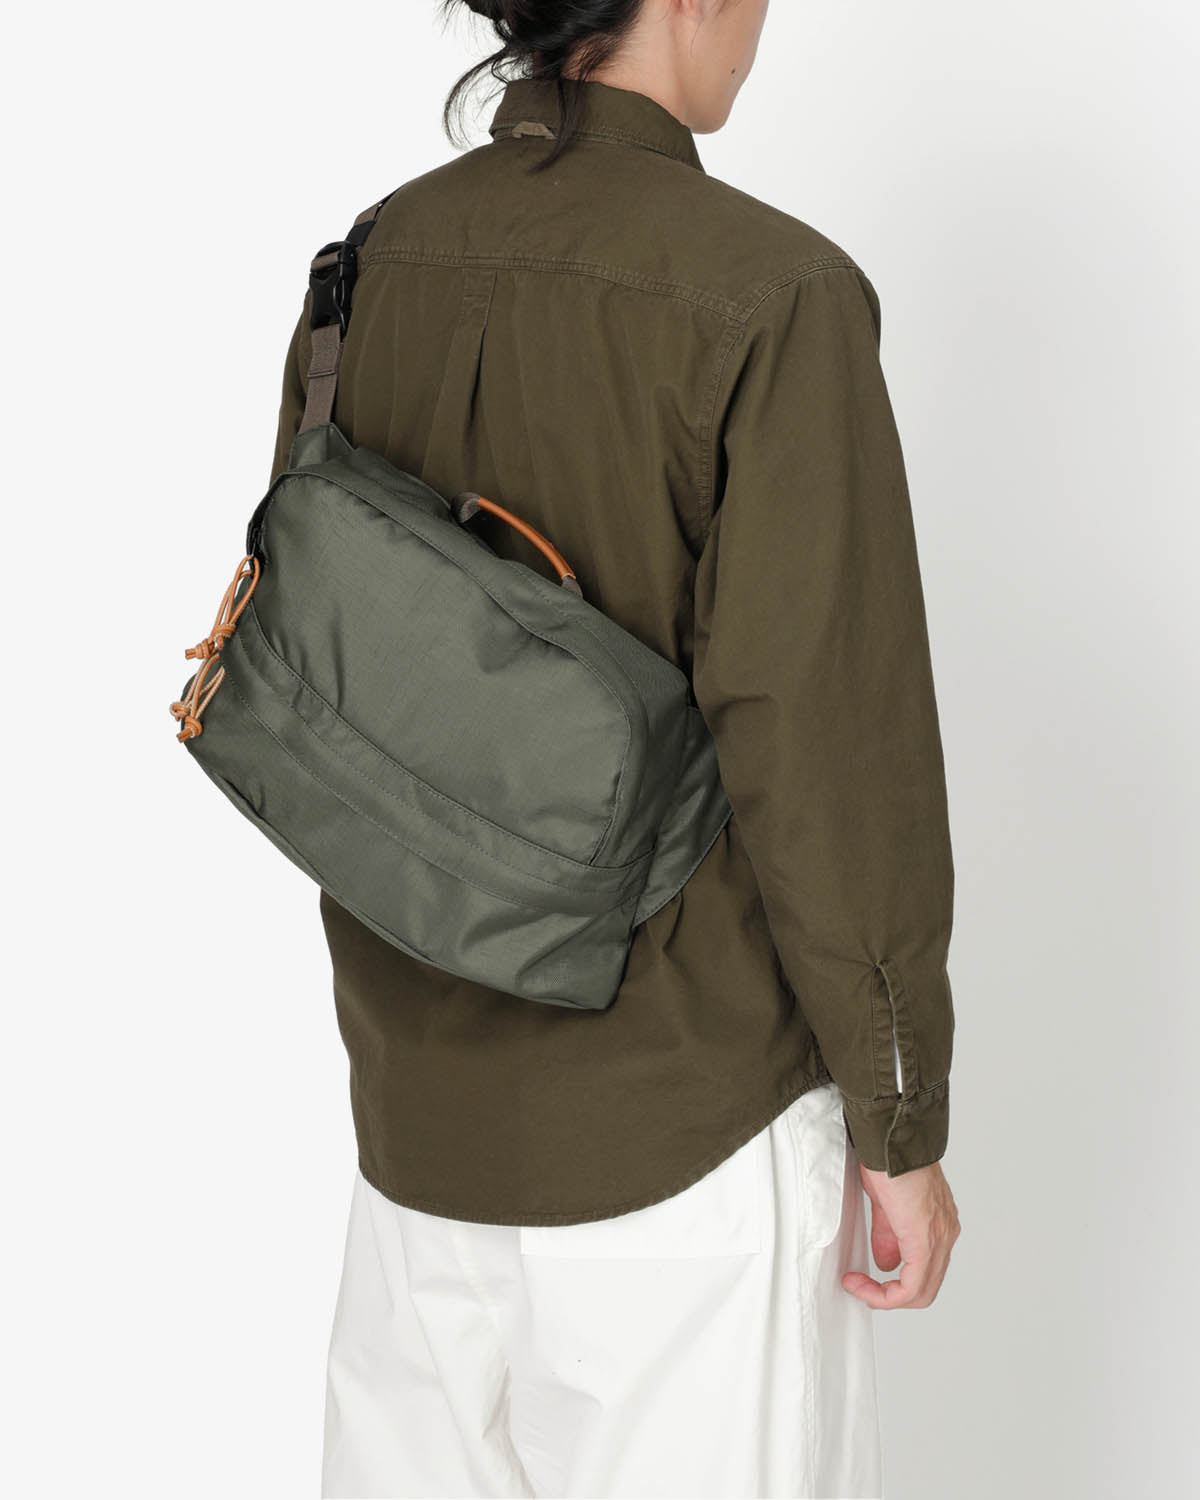 SHOULDER BAG NYLON OXFORD with COW LEATHER